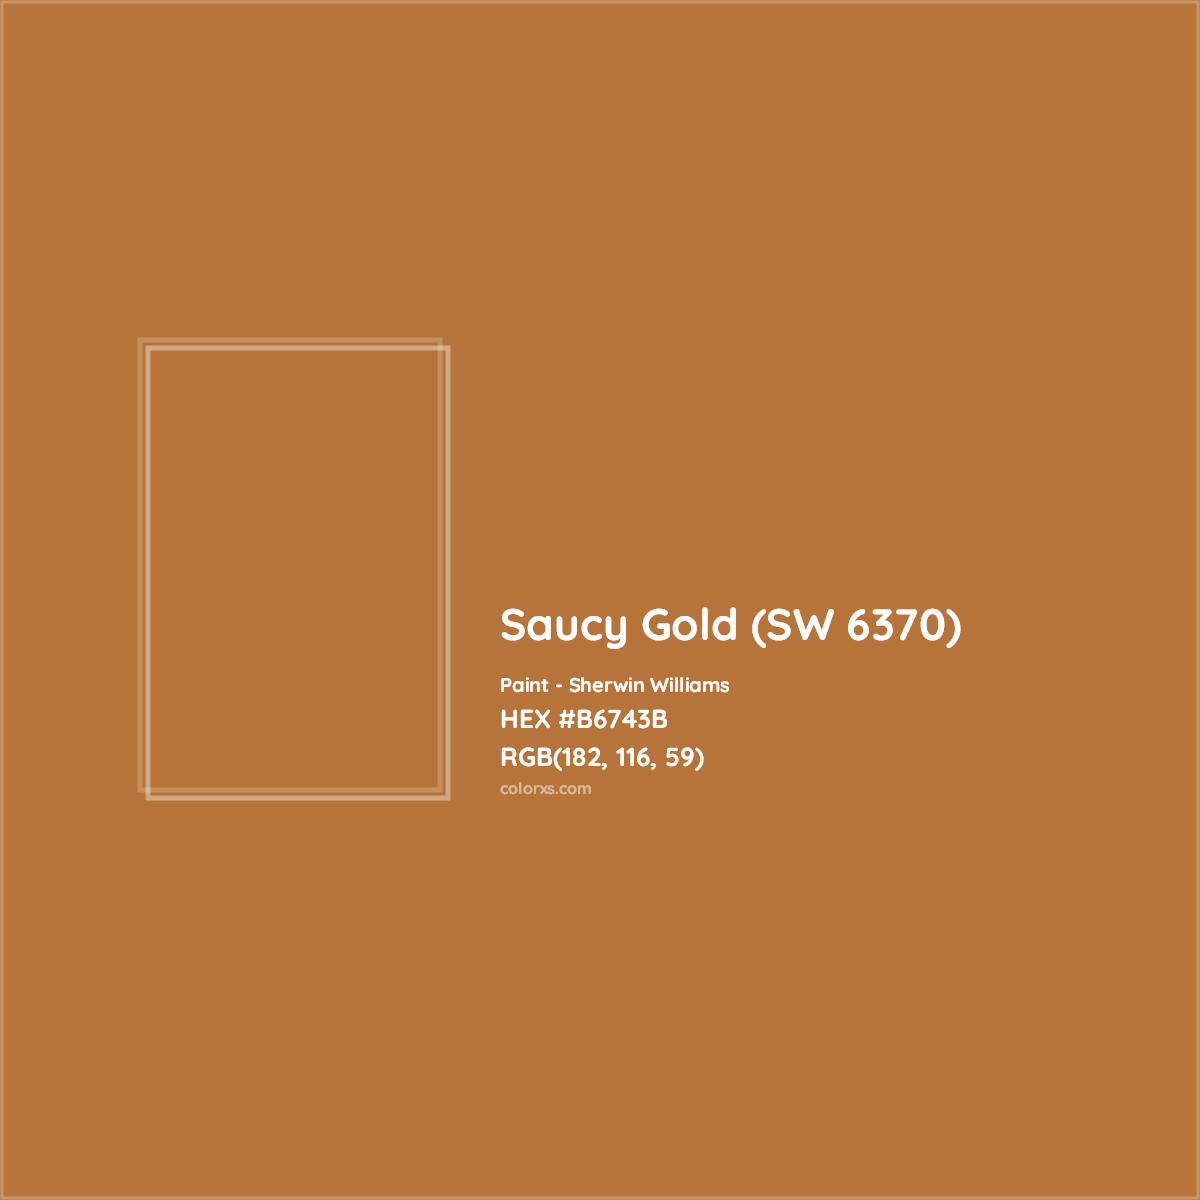 HEX #B6743B Saucy Gold (SW 6370) Paint Sherwin Williams - Color Code